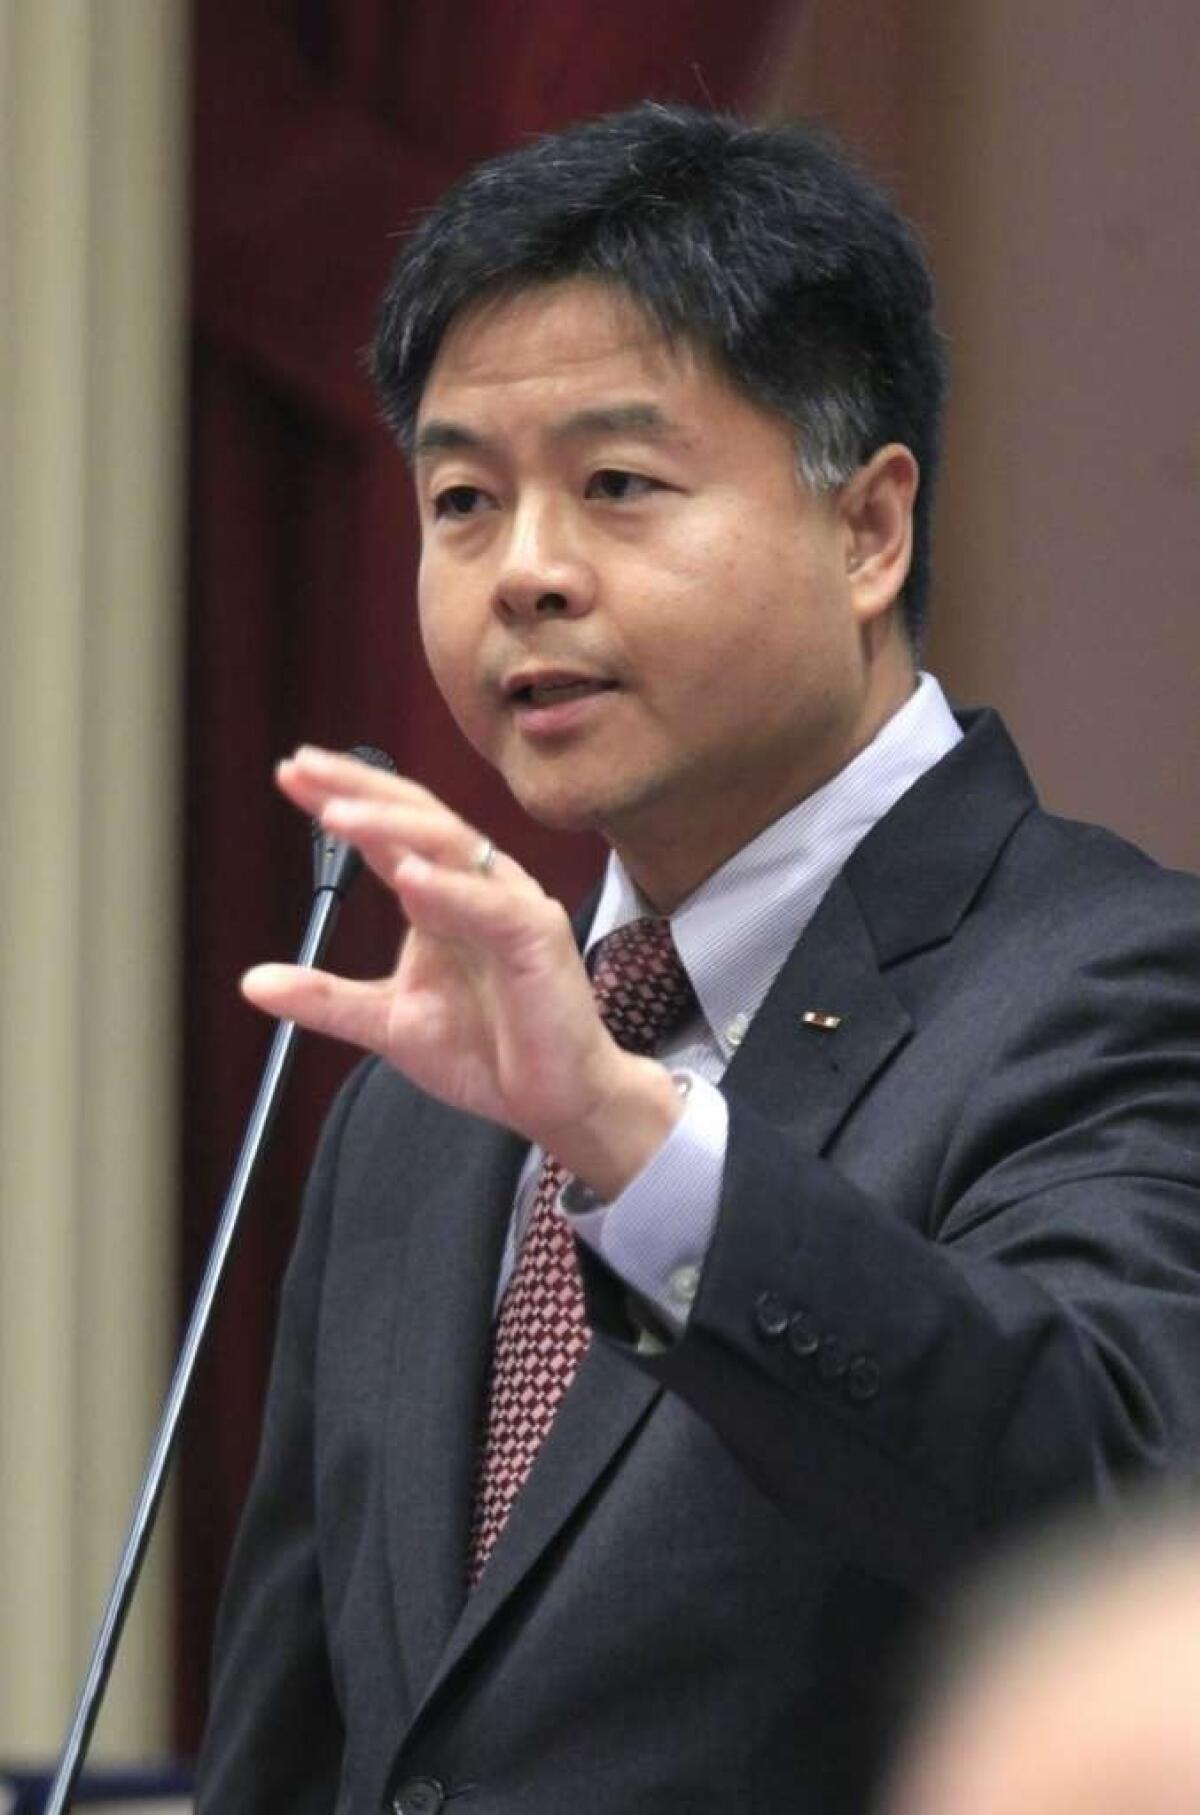 Sen. Ted W. Lieu (D-Torrance) introduced the bill, which quickly gained bipartisan support.